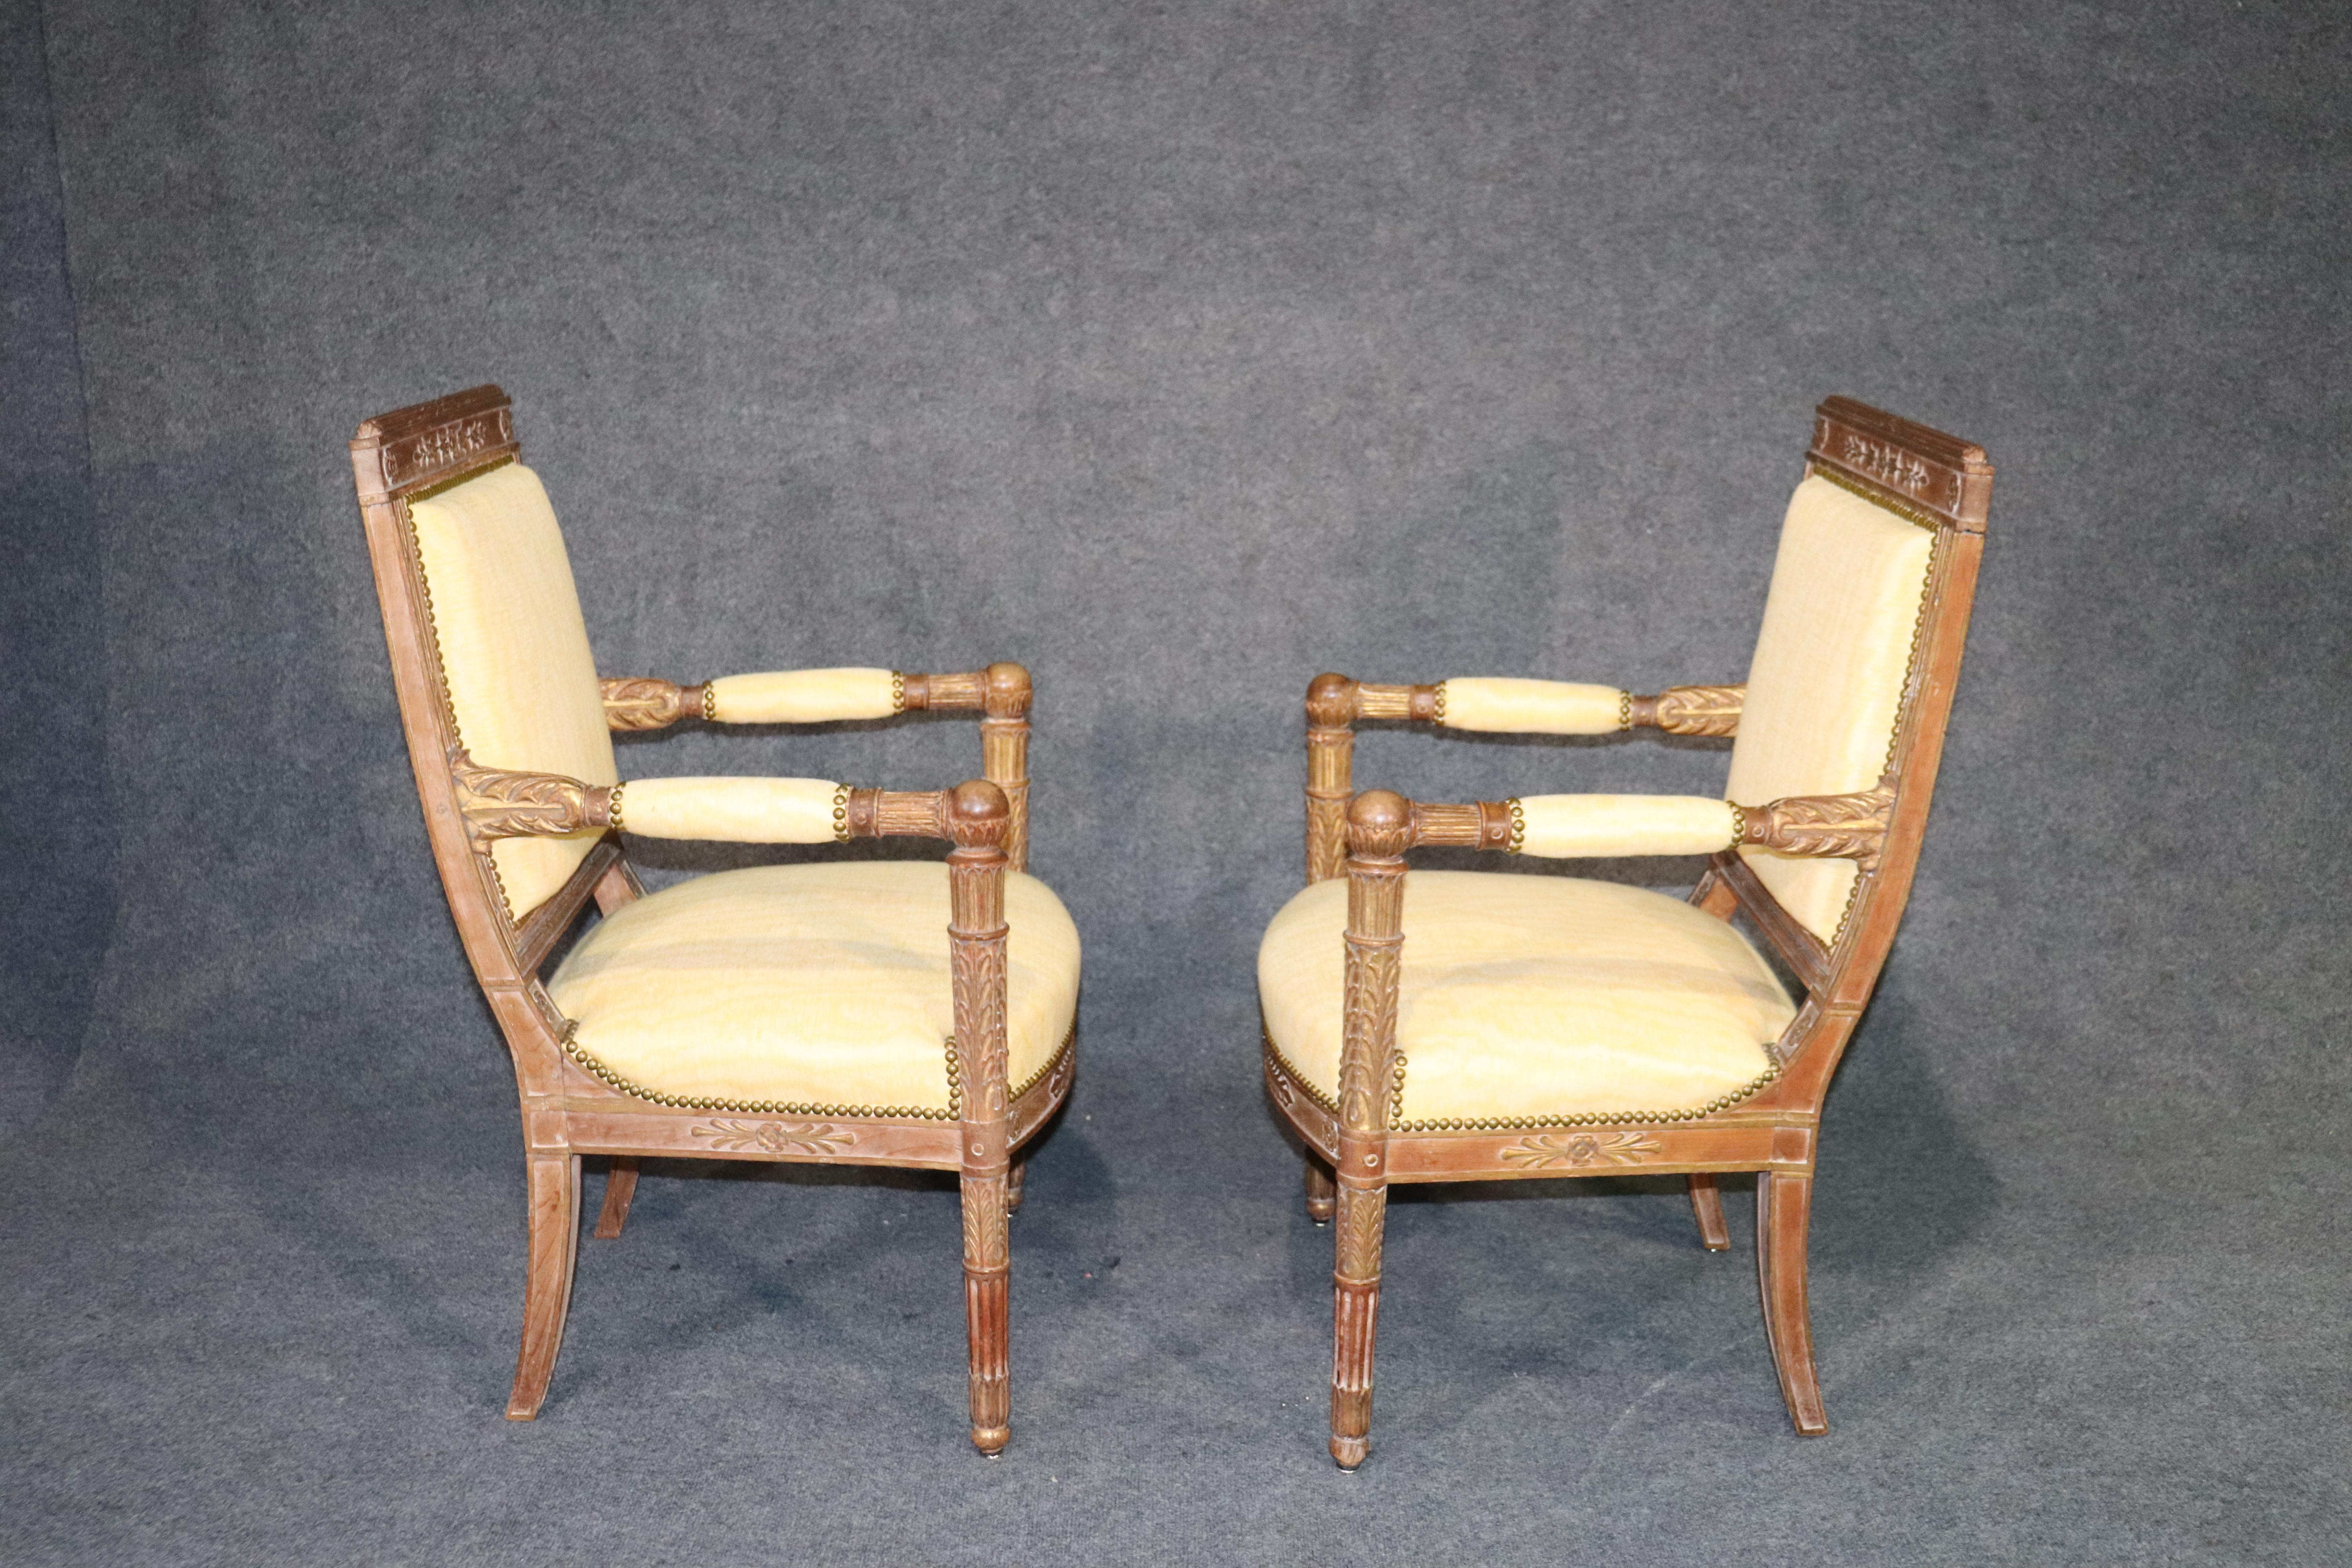 This is a spectacular pair of finely carved French Empire style fauteuils. The chairs have a fantastic finish, unbelievable carving and are in ready to go condition. They are the perfect accent chairs for your current project. The chairs date to the